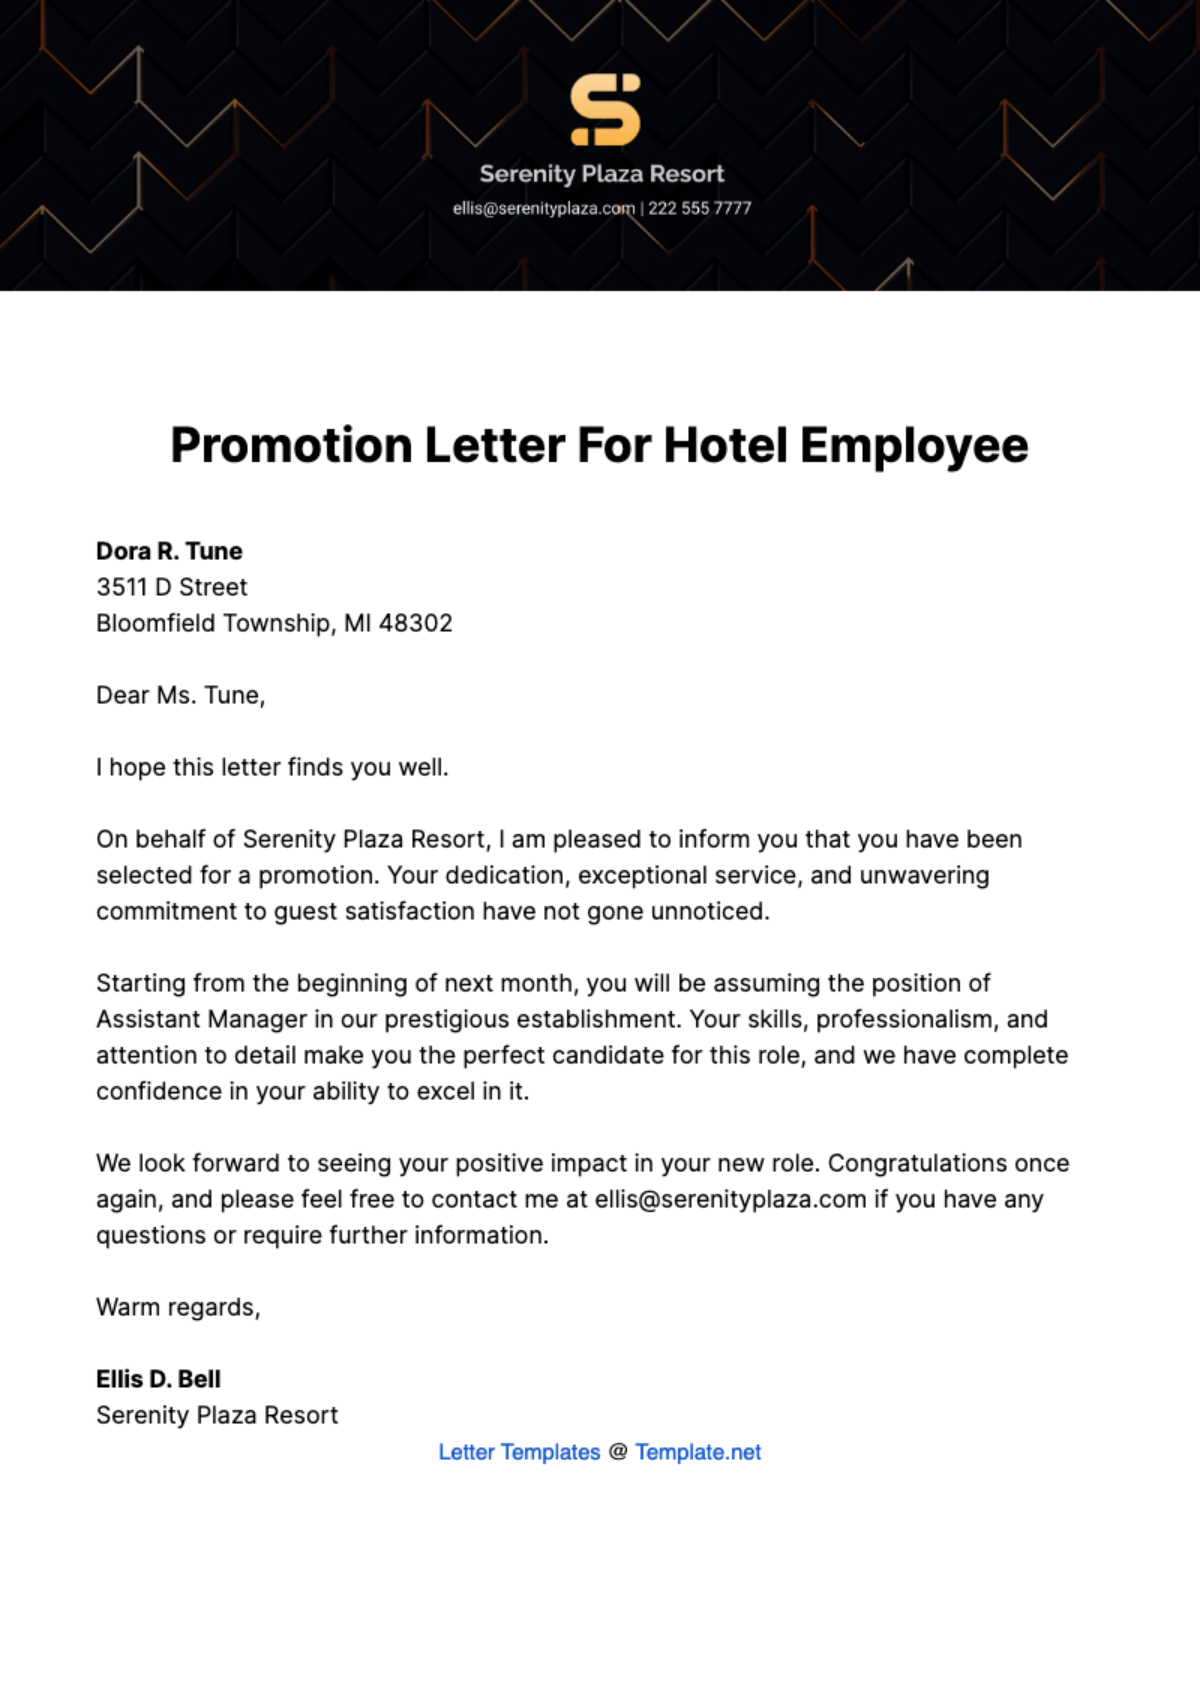 Promotion Letter for Hotel Employee Template